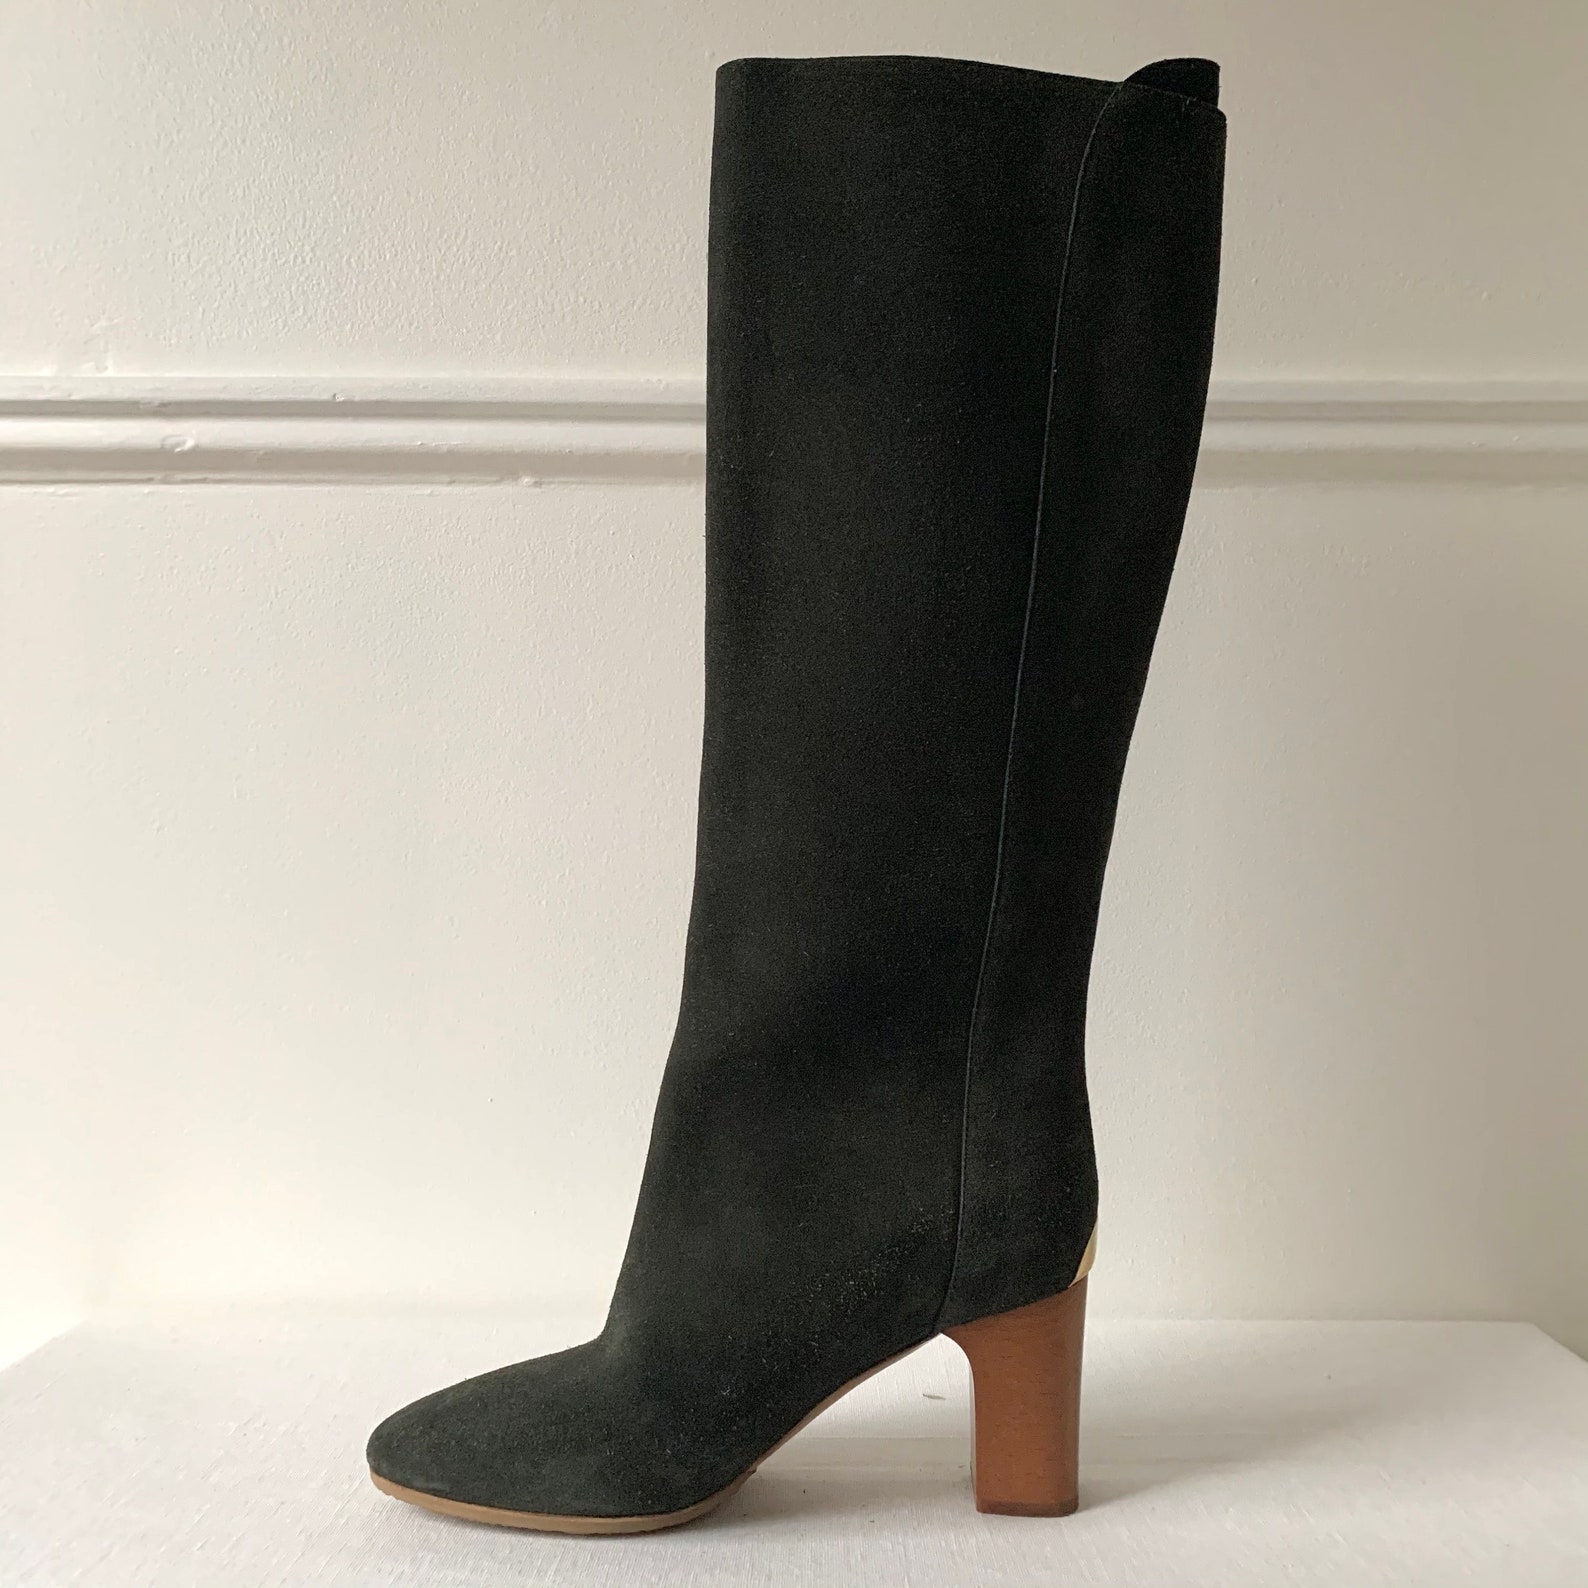 CHLOÉ knee high boots green suede | Etsy